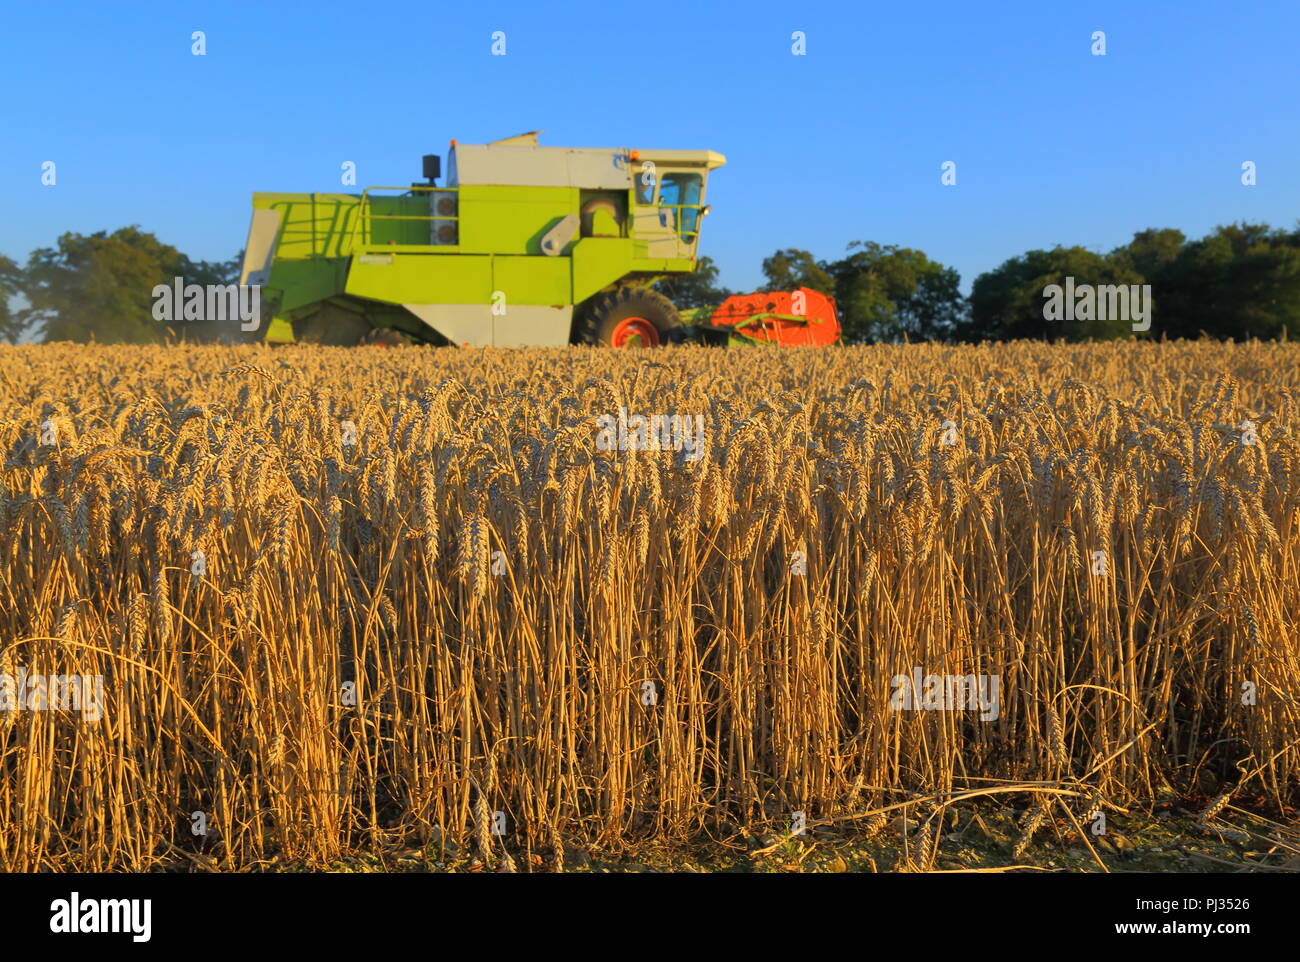 Combine harvesting wheat on the farmland field in Somerset Stock Photo